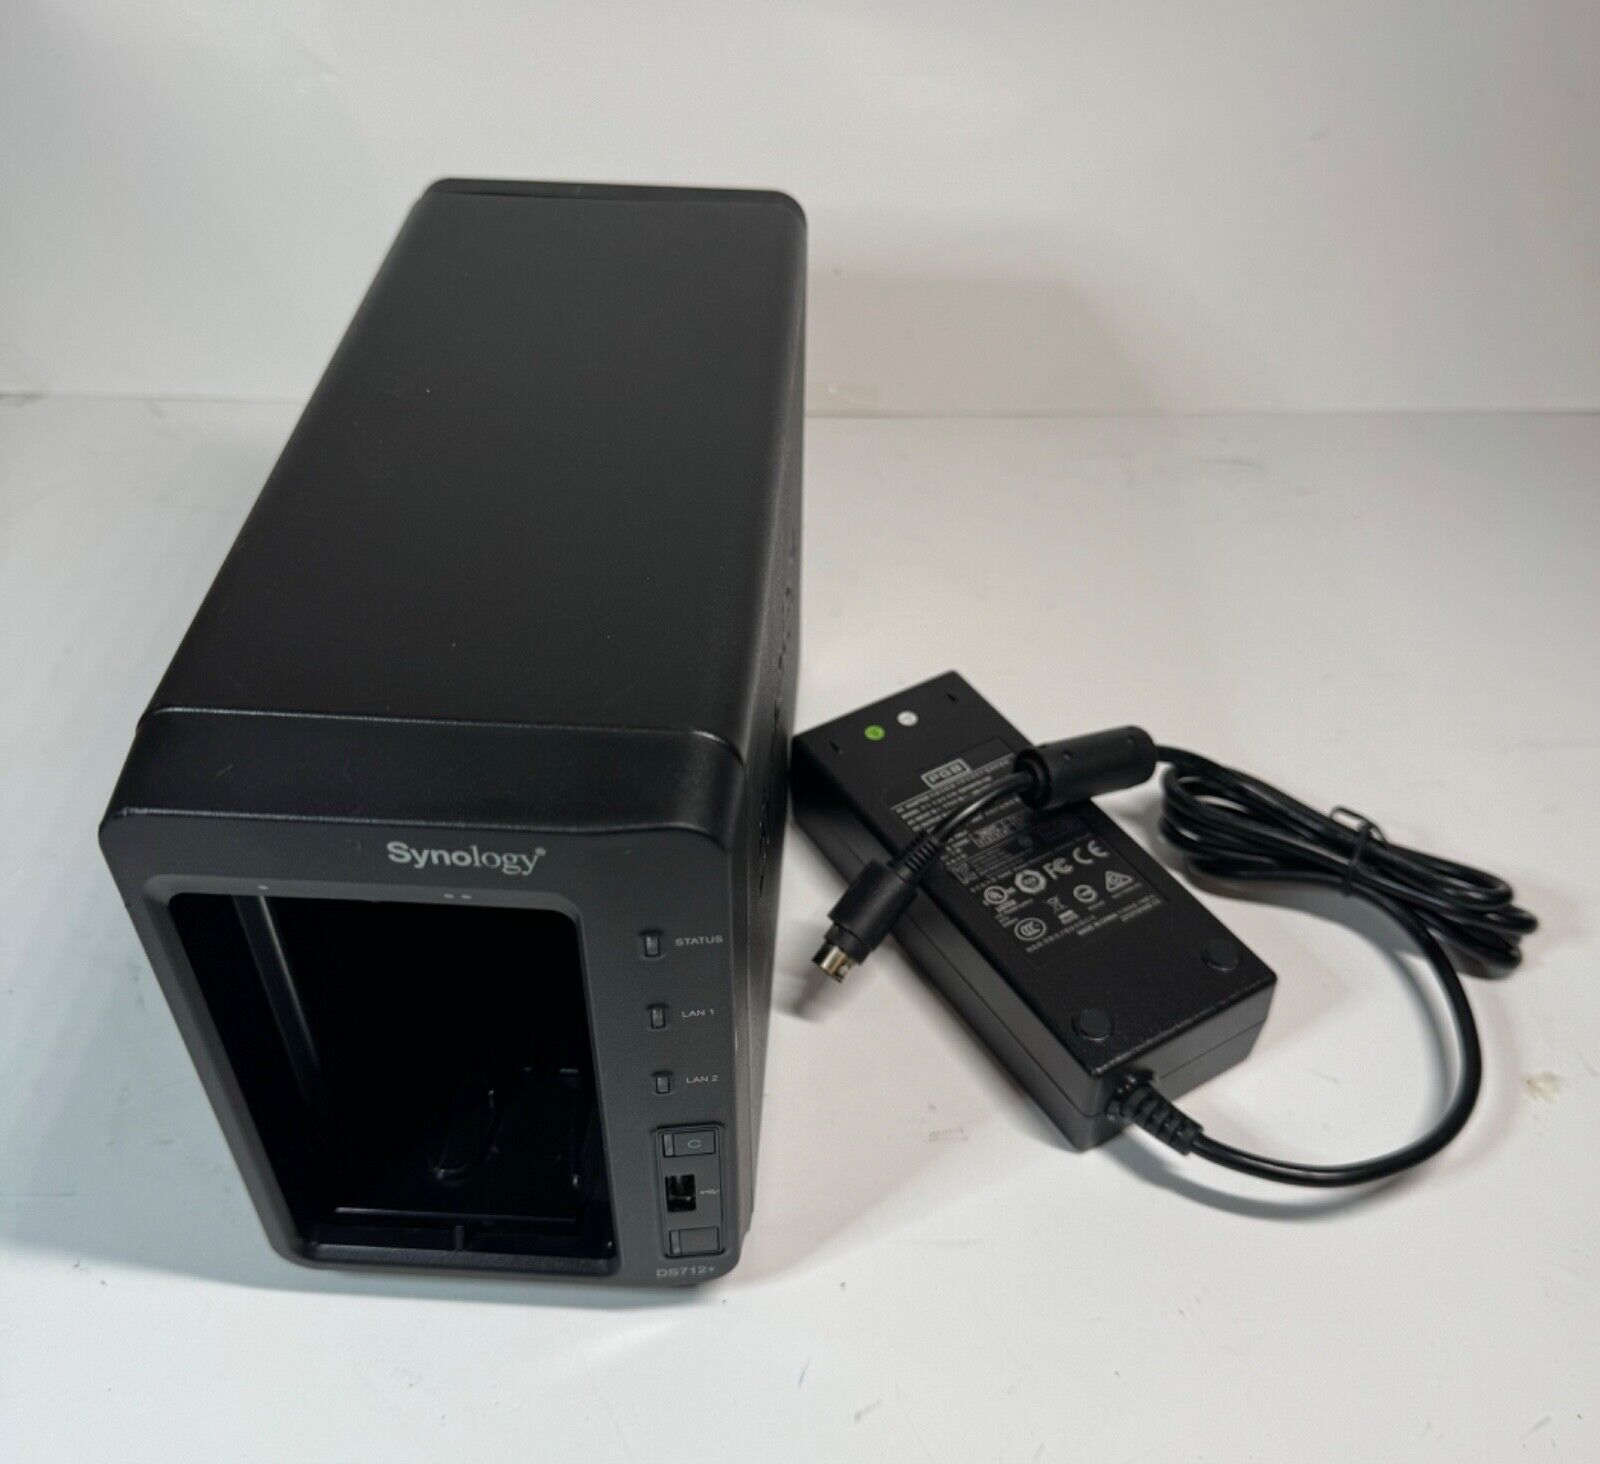 Synology DiskStation DS712+ 2-Bay All-in-One NAS Server WITHOUT caddies OR HDs